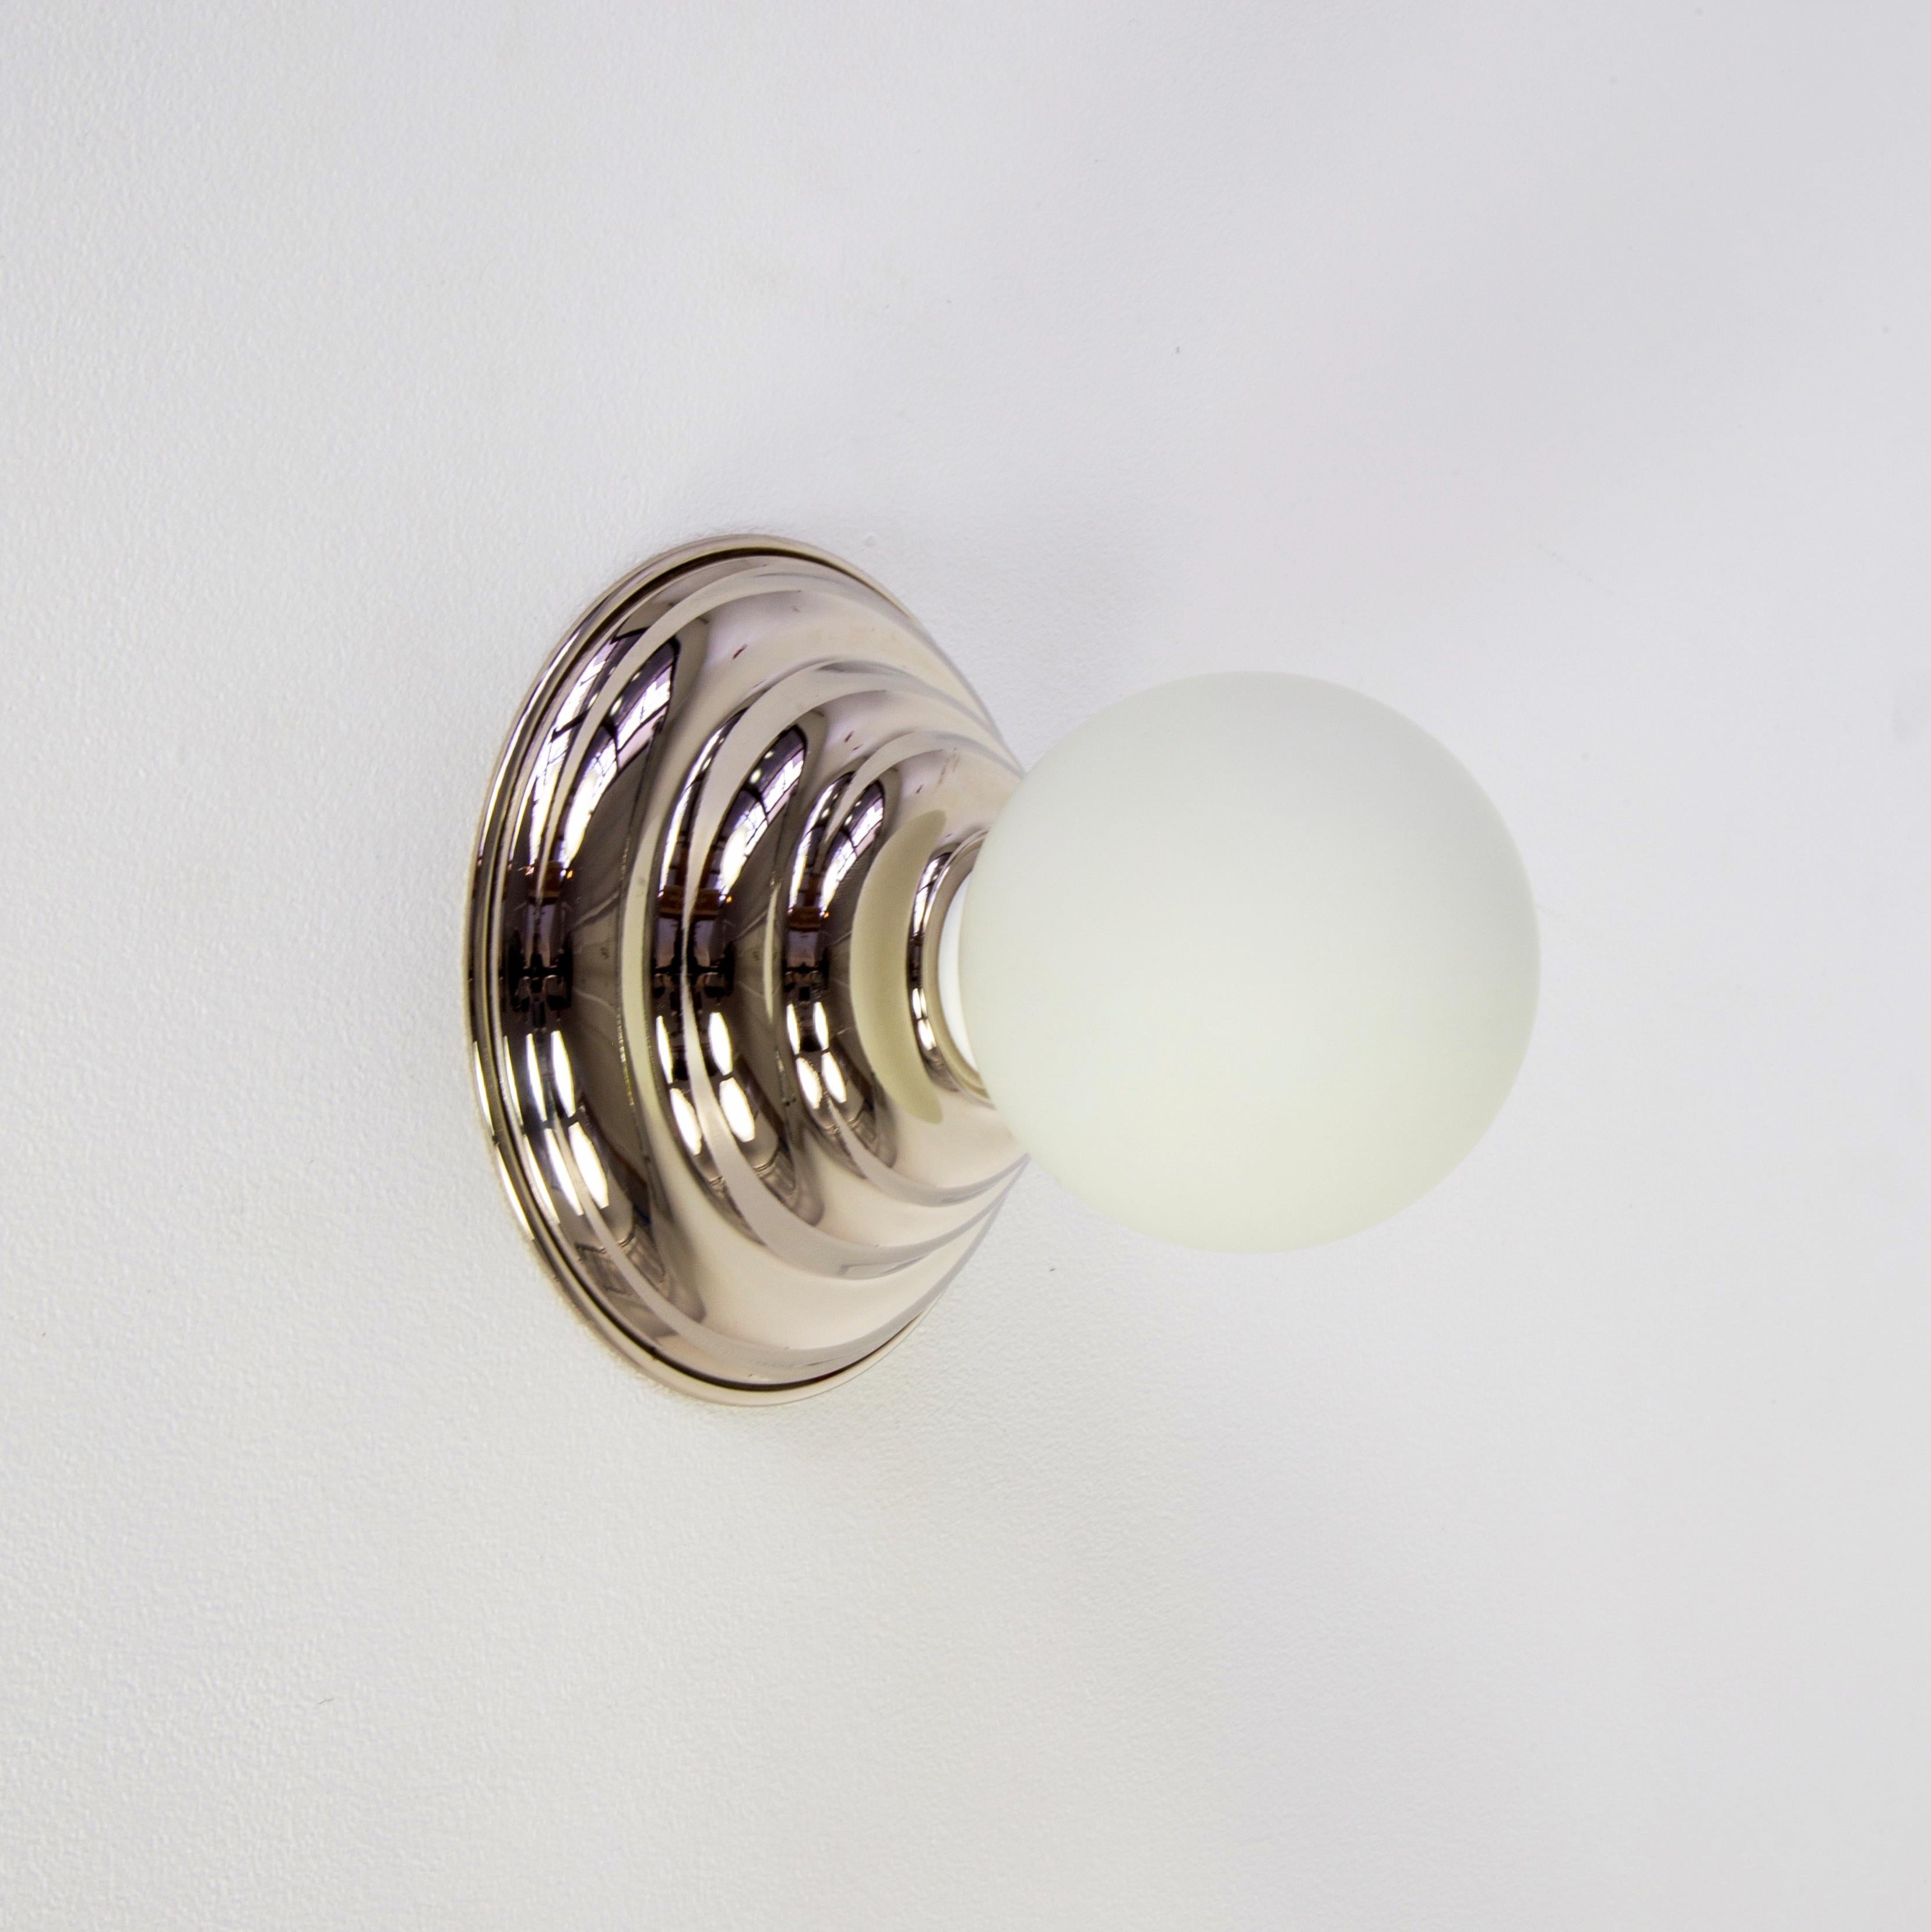 Plated Hive Sconce by Research.Lighting, Polished Nickel, Made to Order For Sale